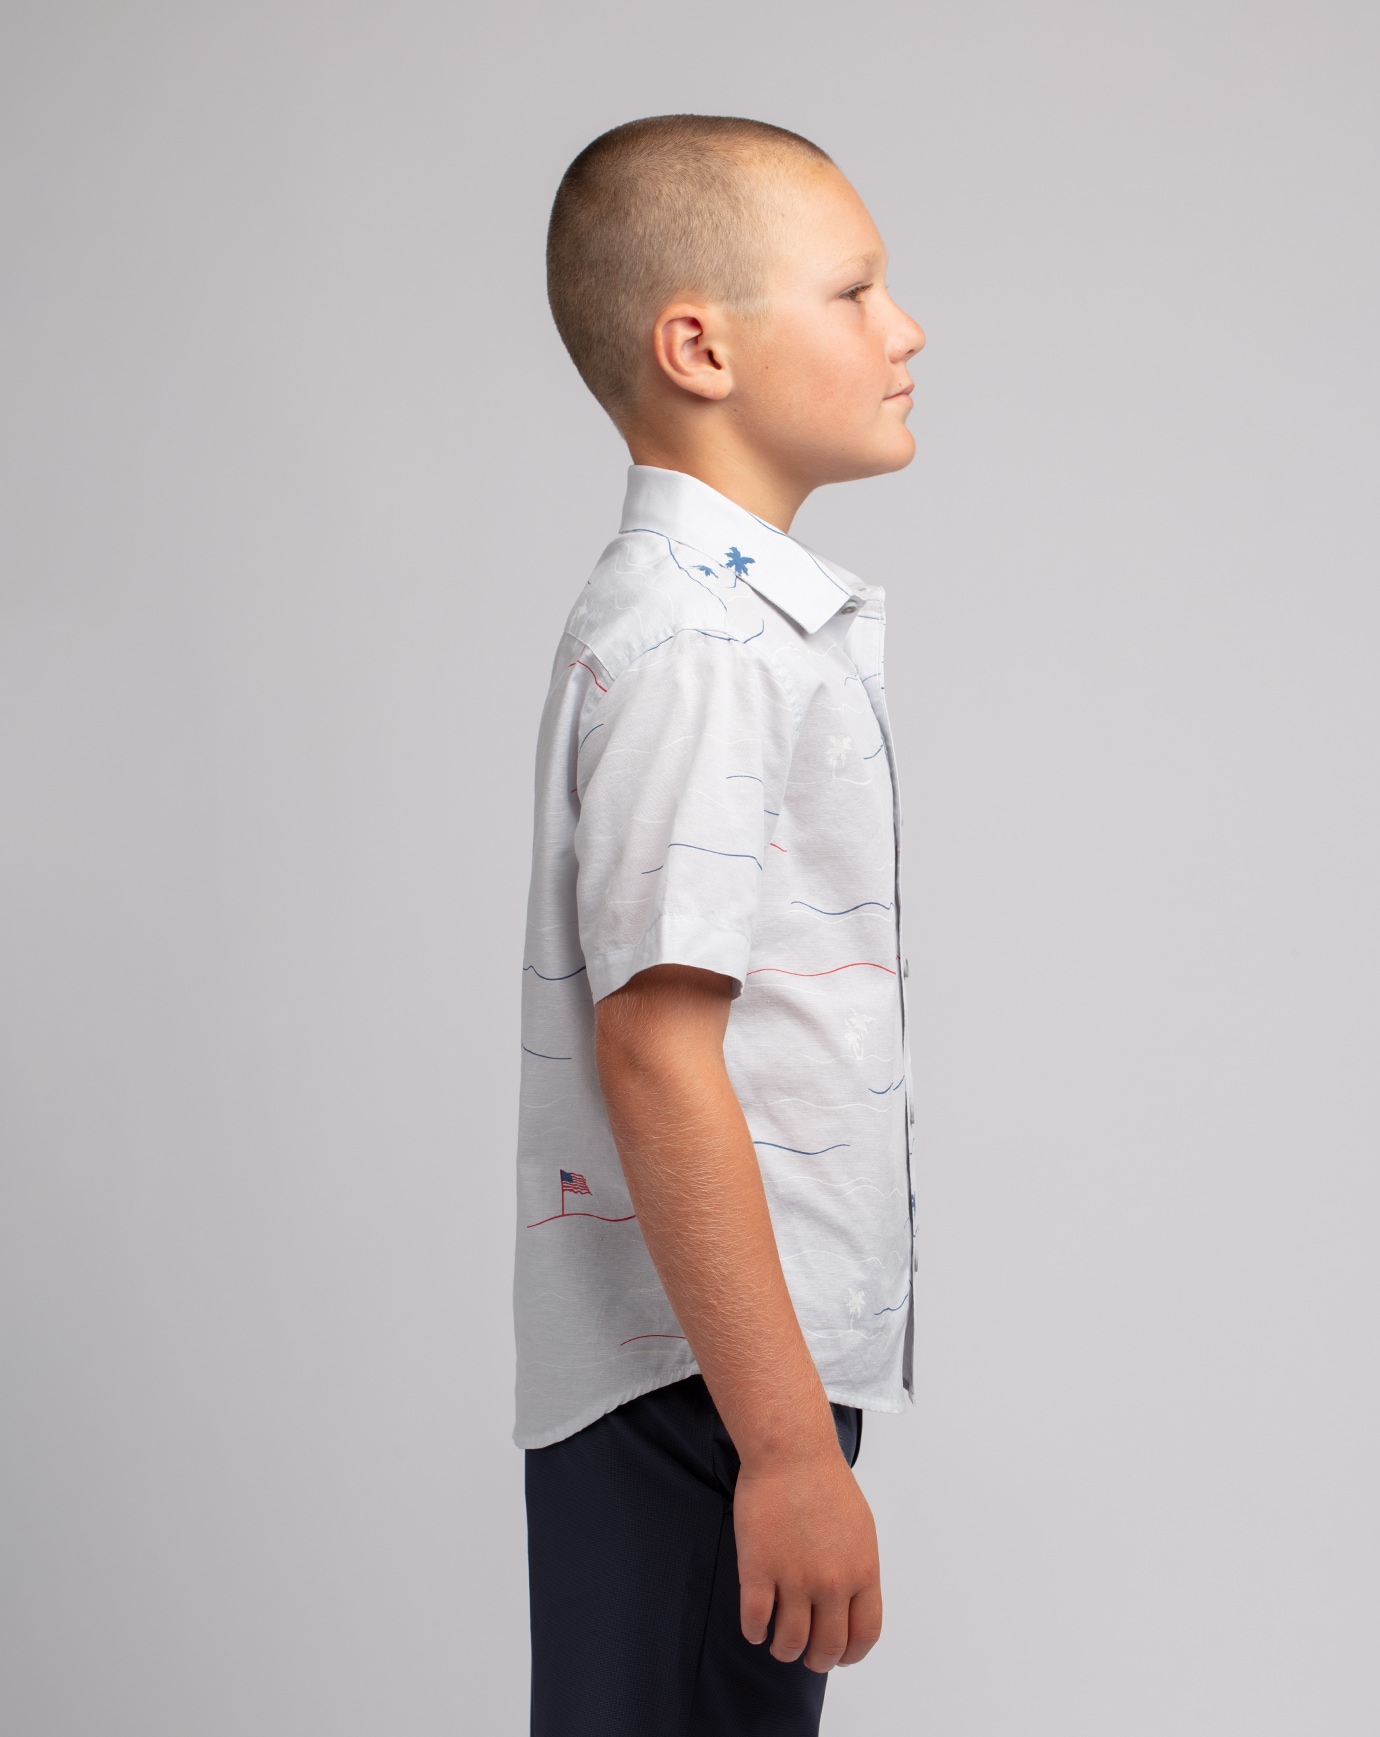 STAR SPANGLED BANNER YOUTH BUTTON-UP Image Thumbnail 2